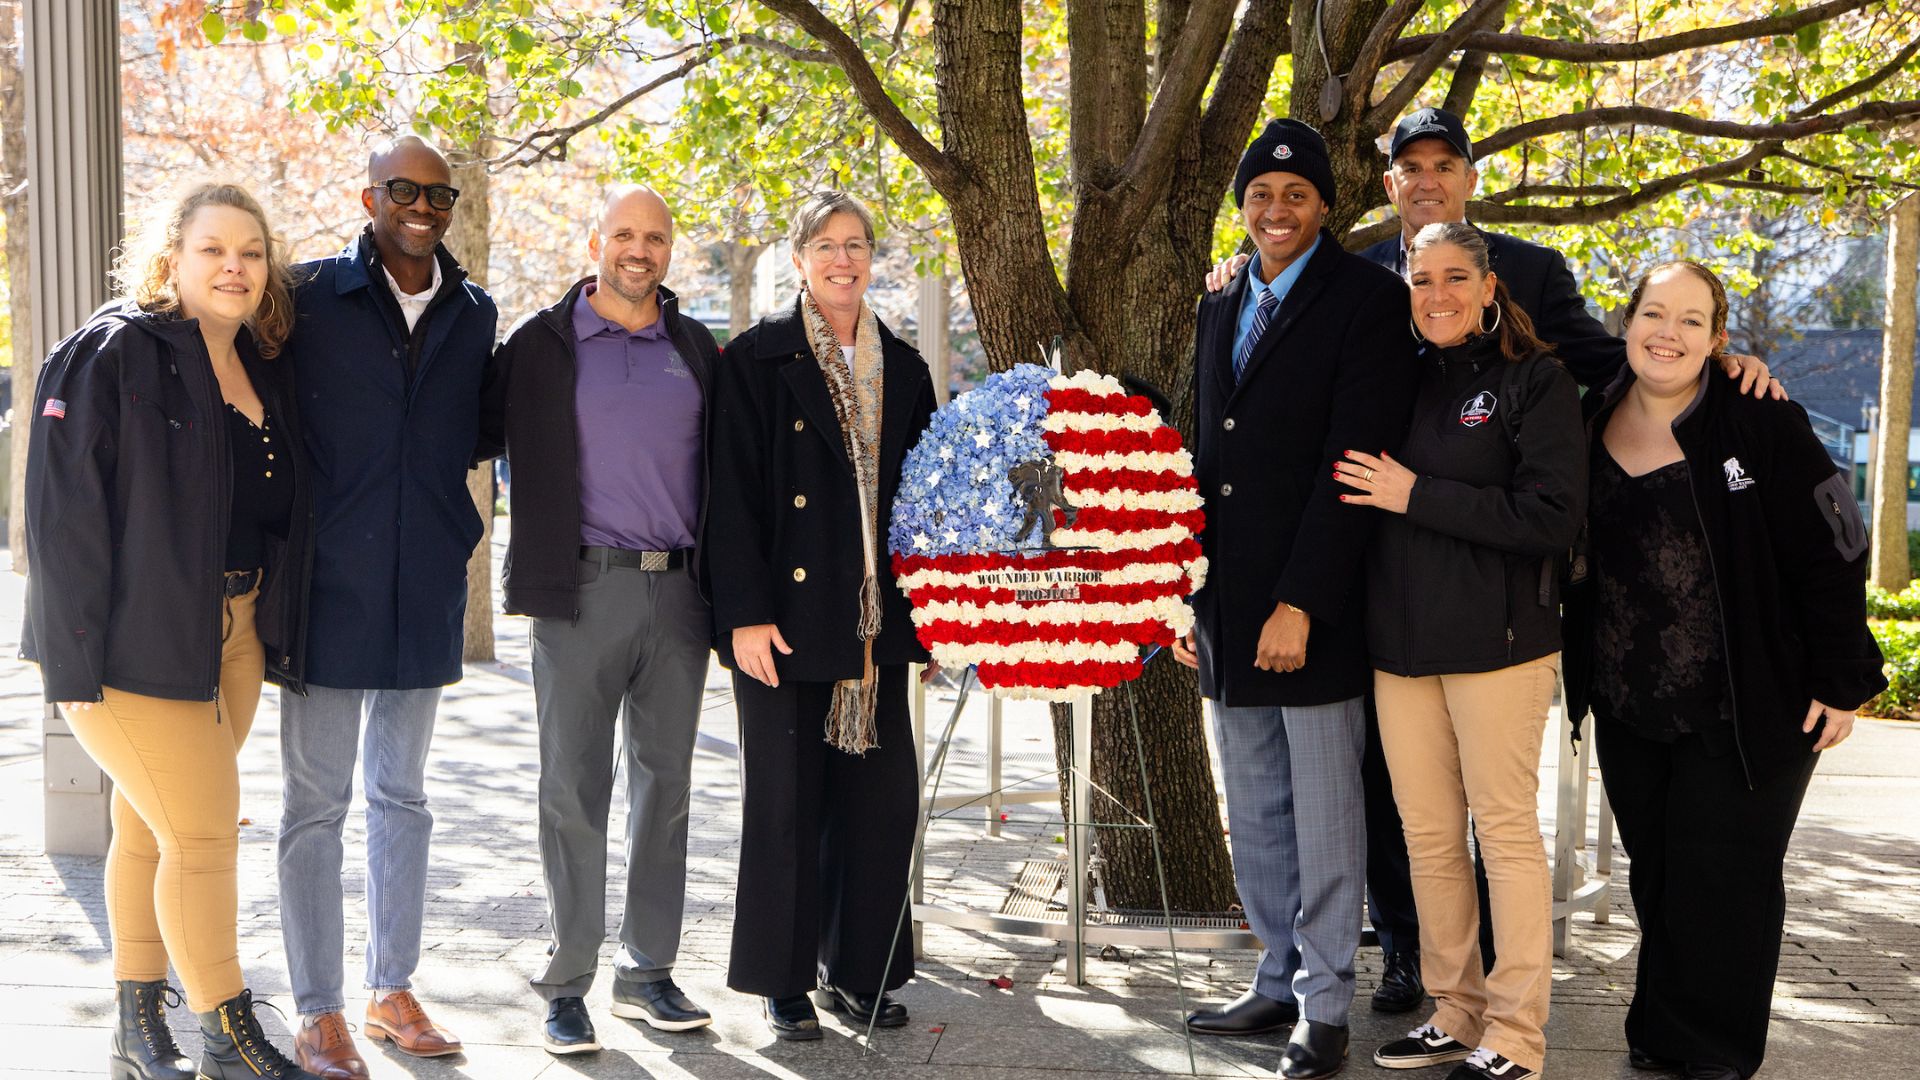 A row of smiling people at the Survivor Tree, with an American Flag wreath at center